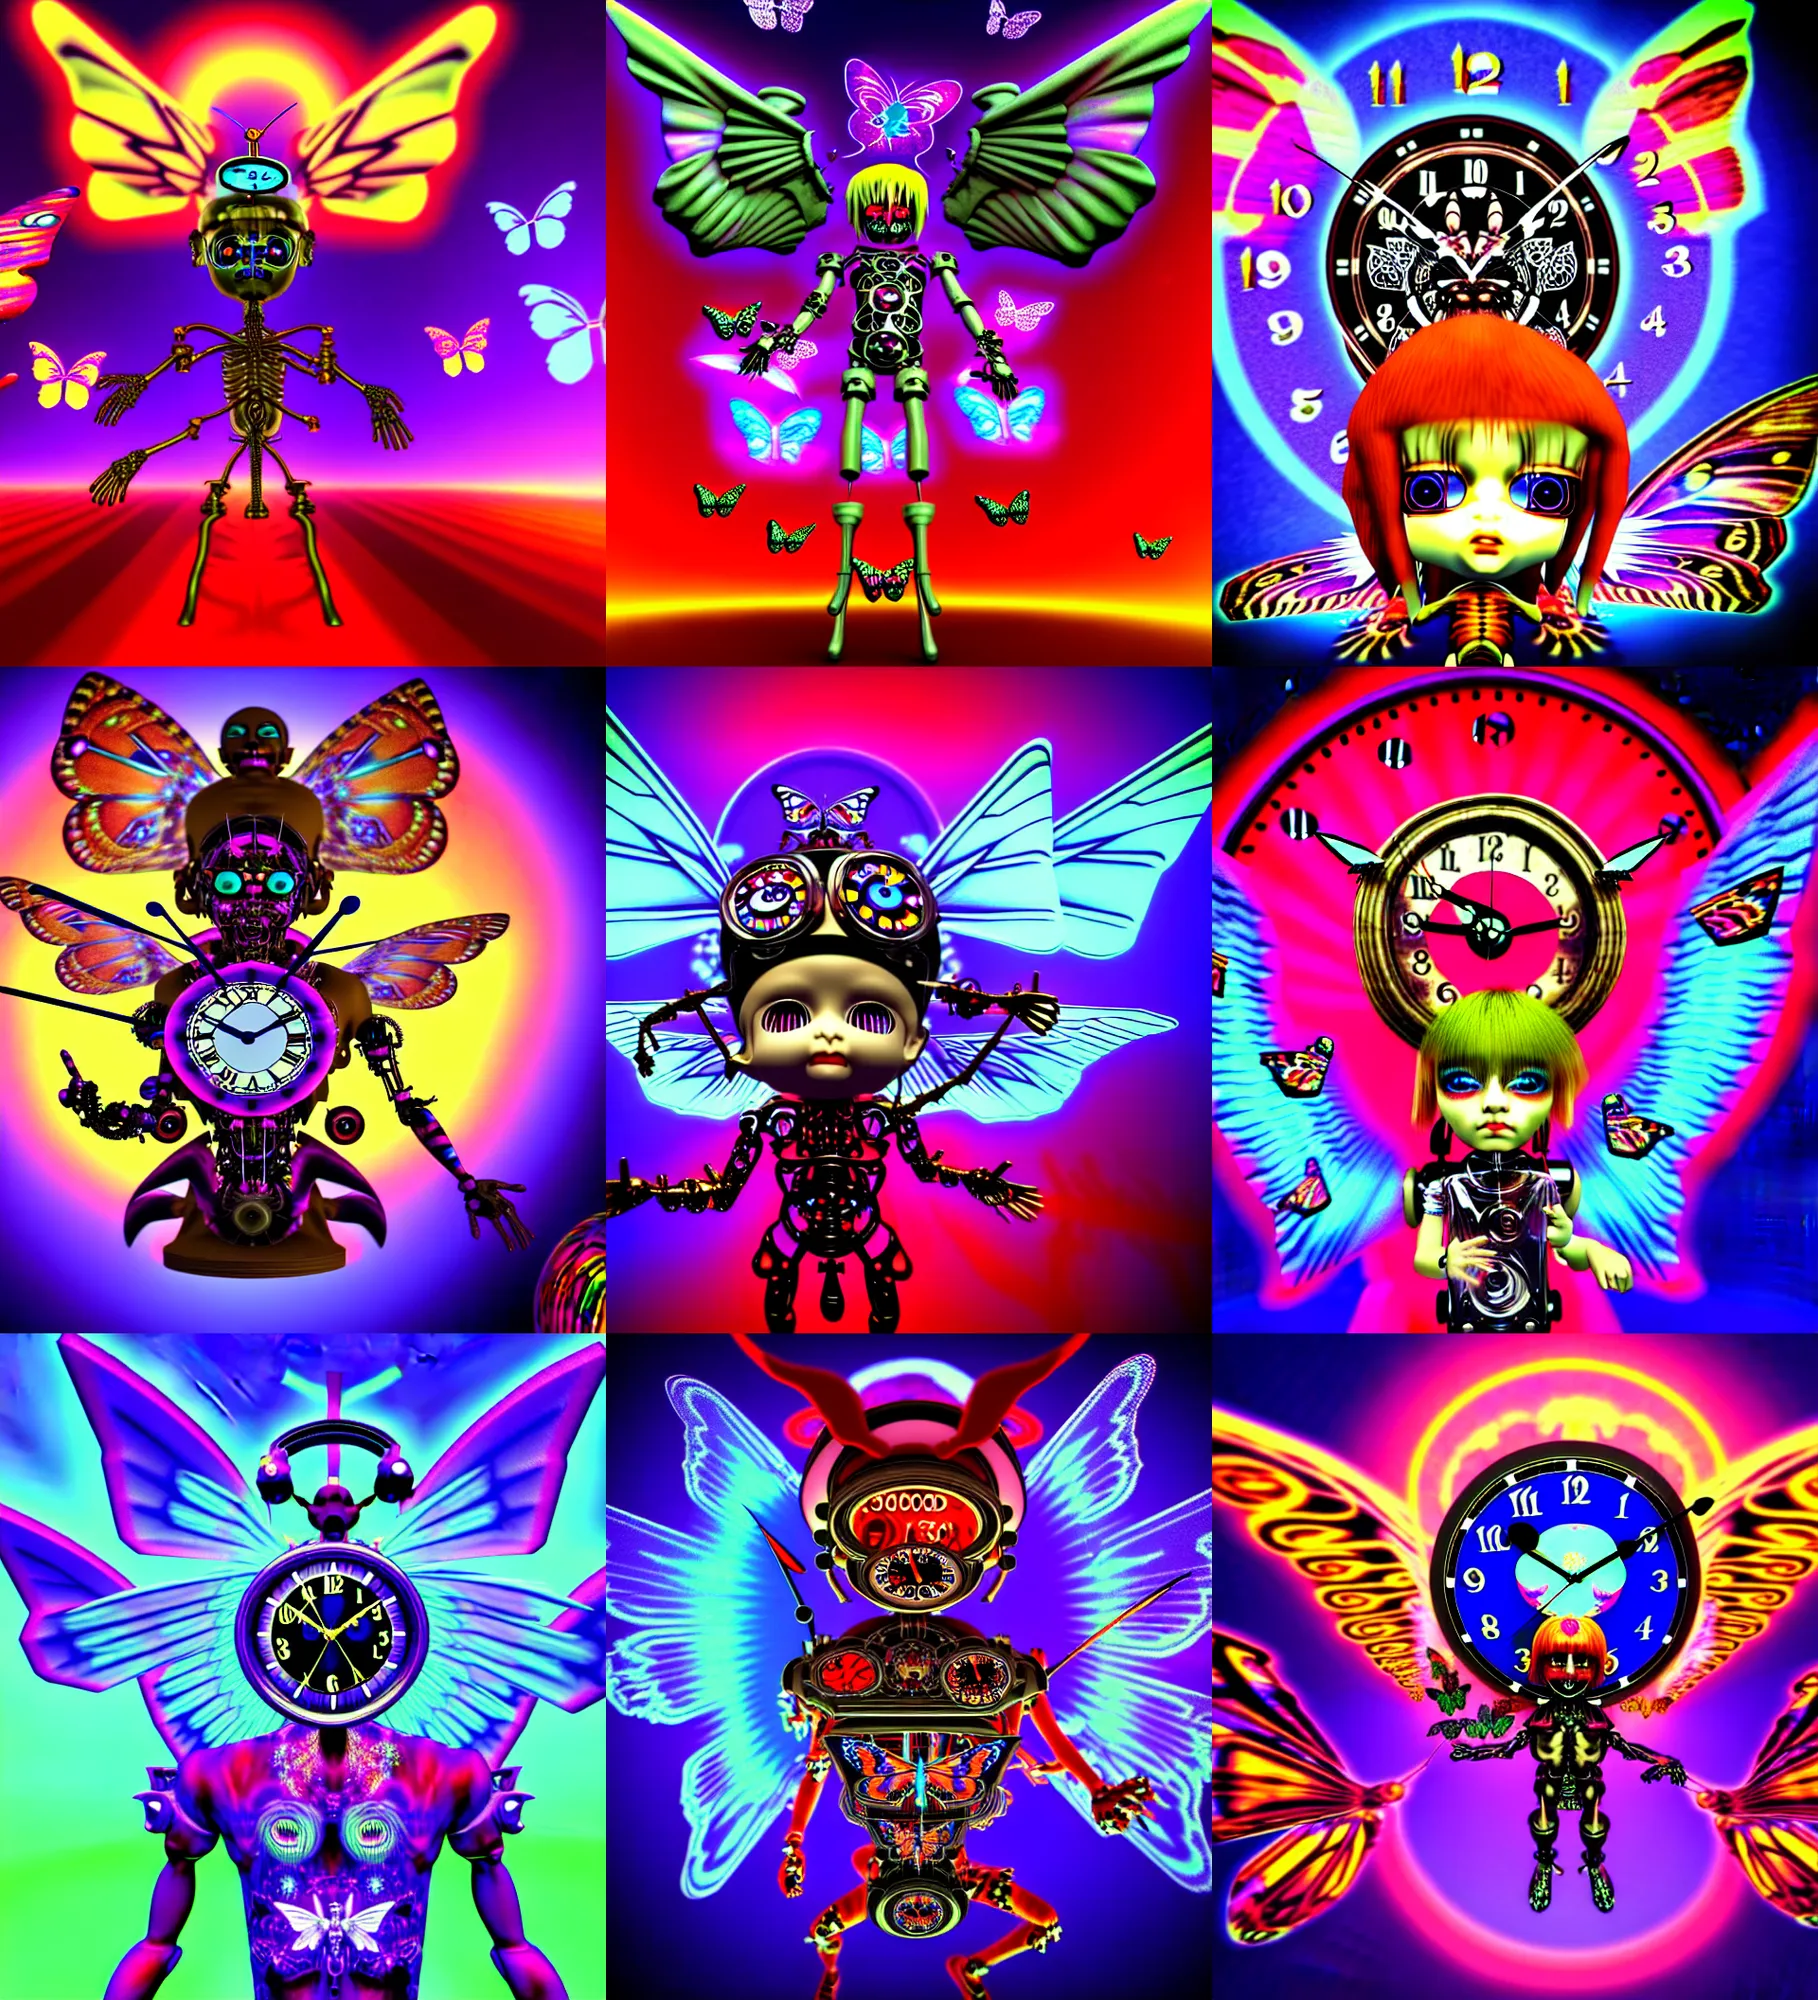 Prompt: early 3 d cgi render of chibi clock cyborg demon with angel wings against a psychedelic surreal background with 3 d butterflies and 3 d flowers n the style of 1 9 9 0's cg graphics lsd dream emulator psx graphics 3 d rendered, 3 do magazine, portrait